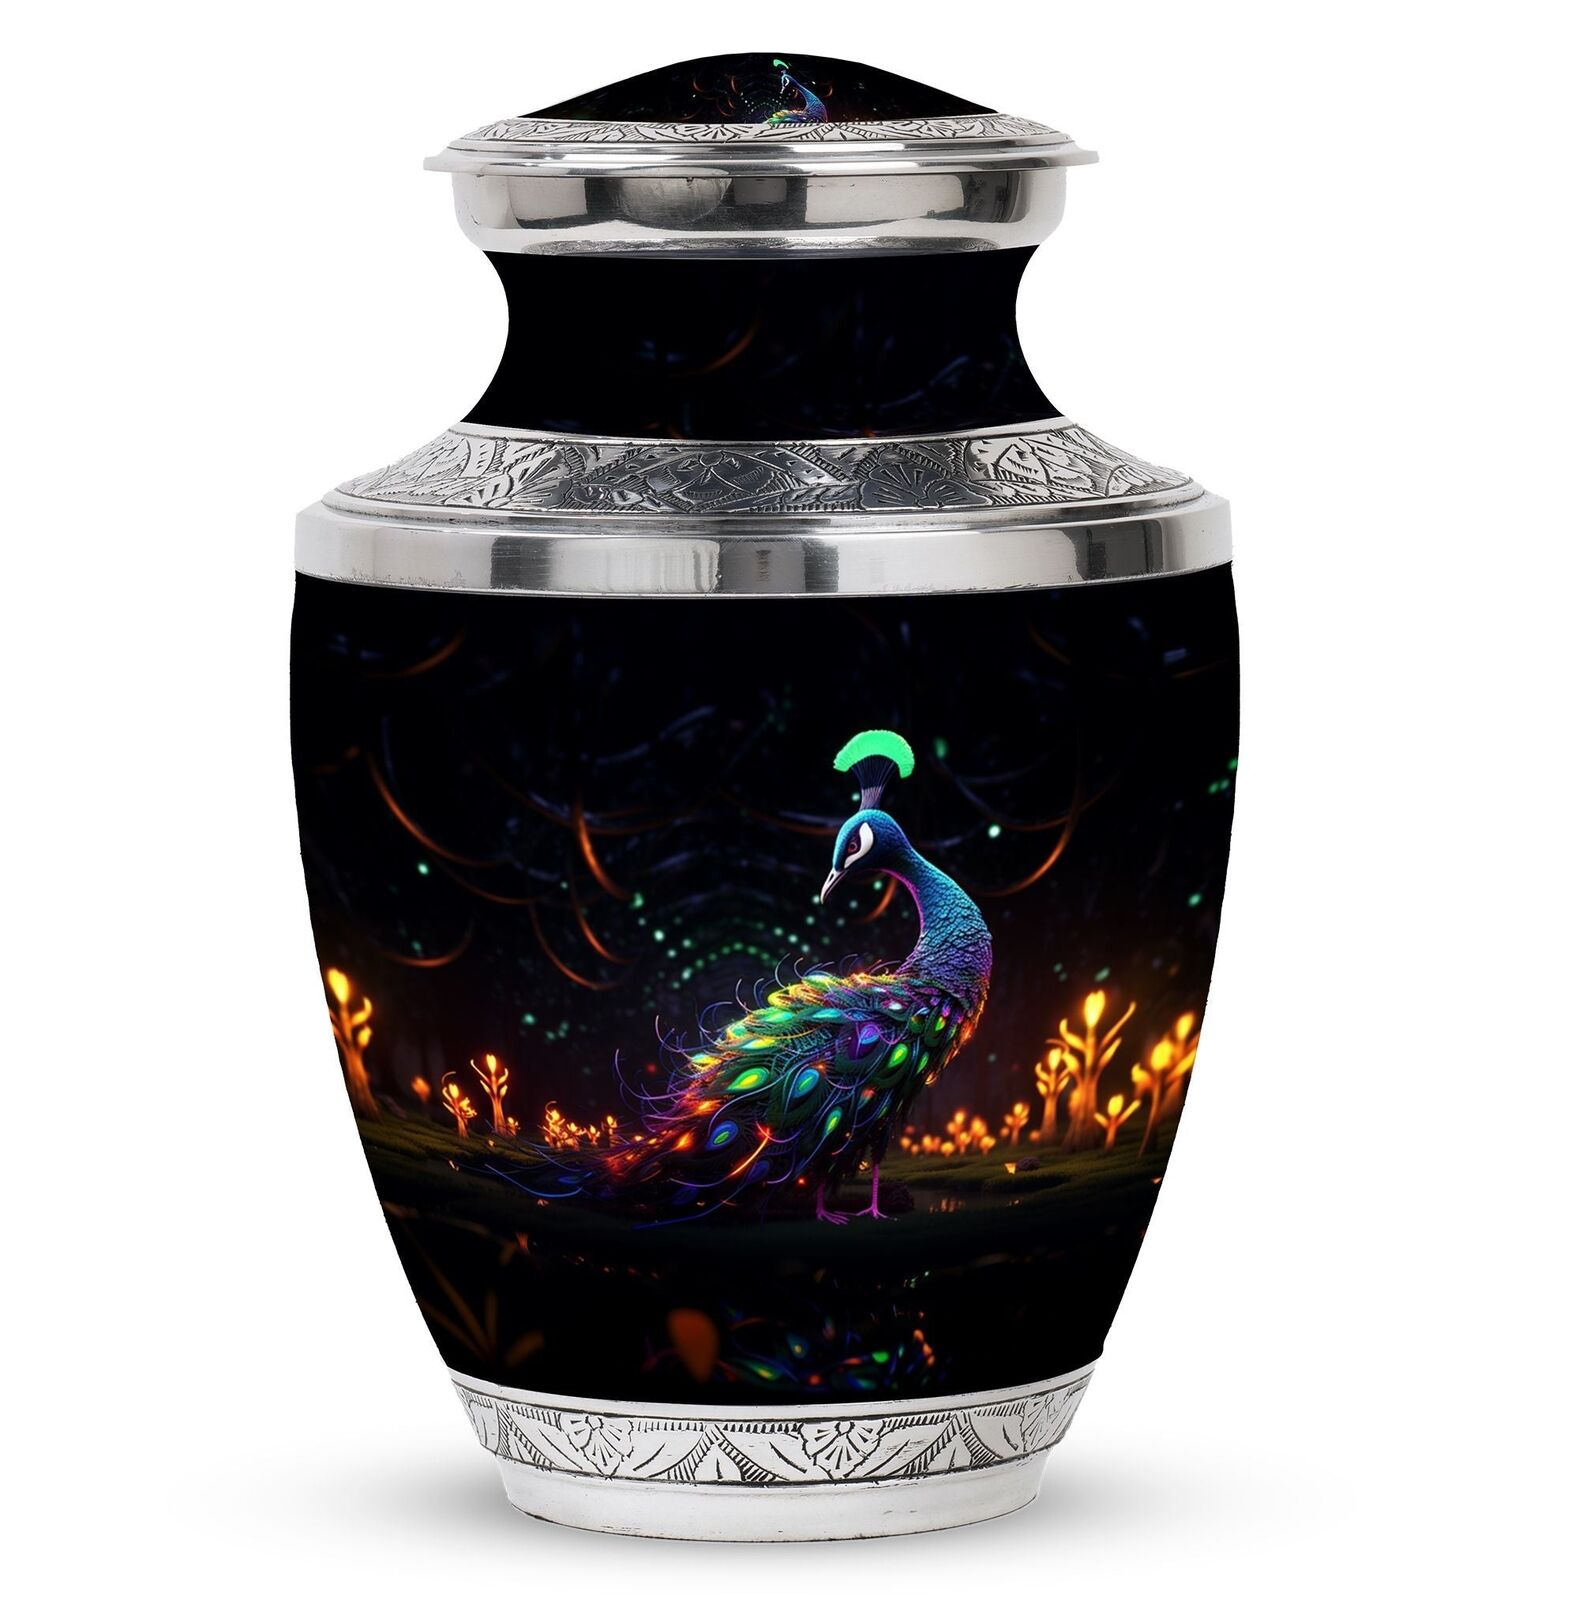 Peacock-inspired Cherished Memorial Urn for Cremation Ashes